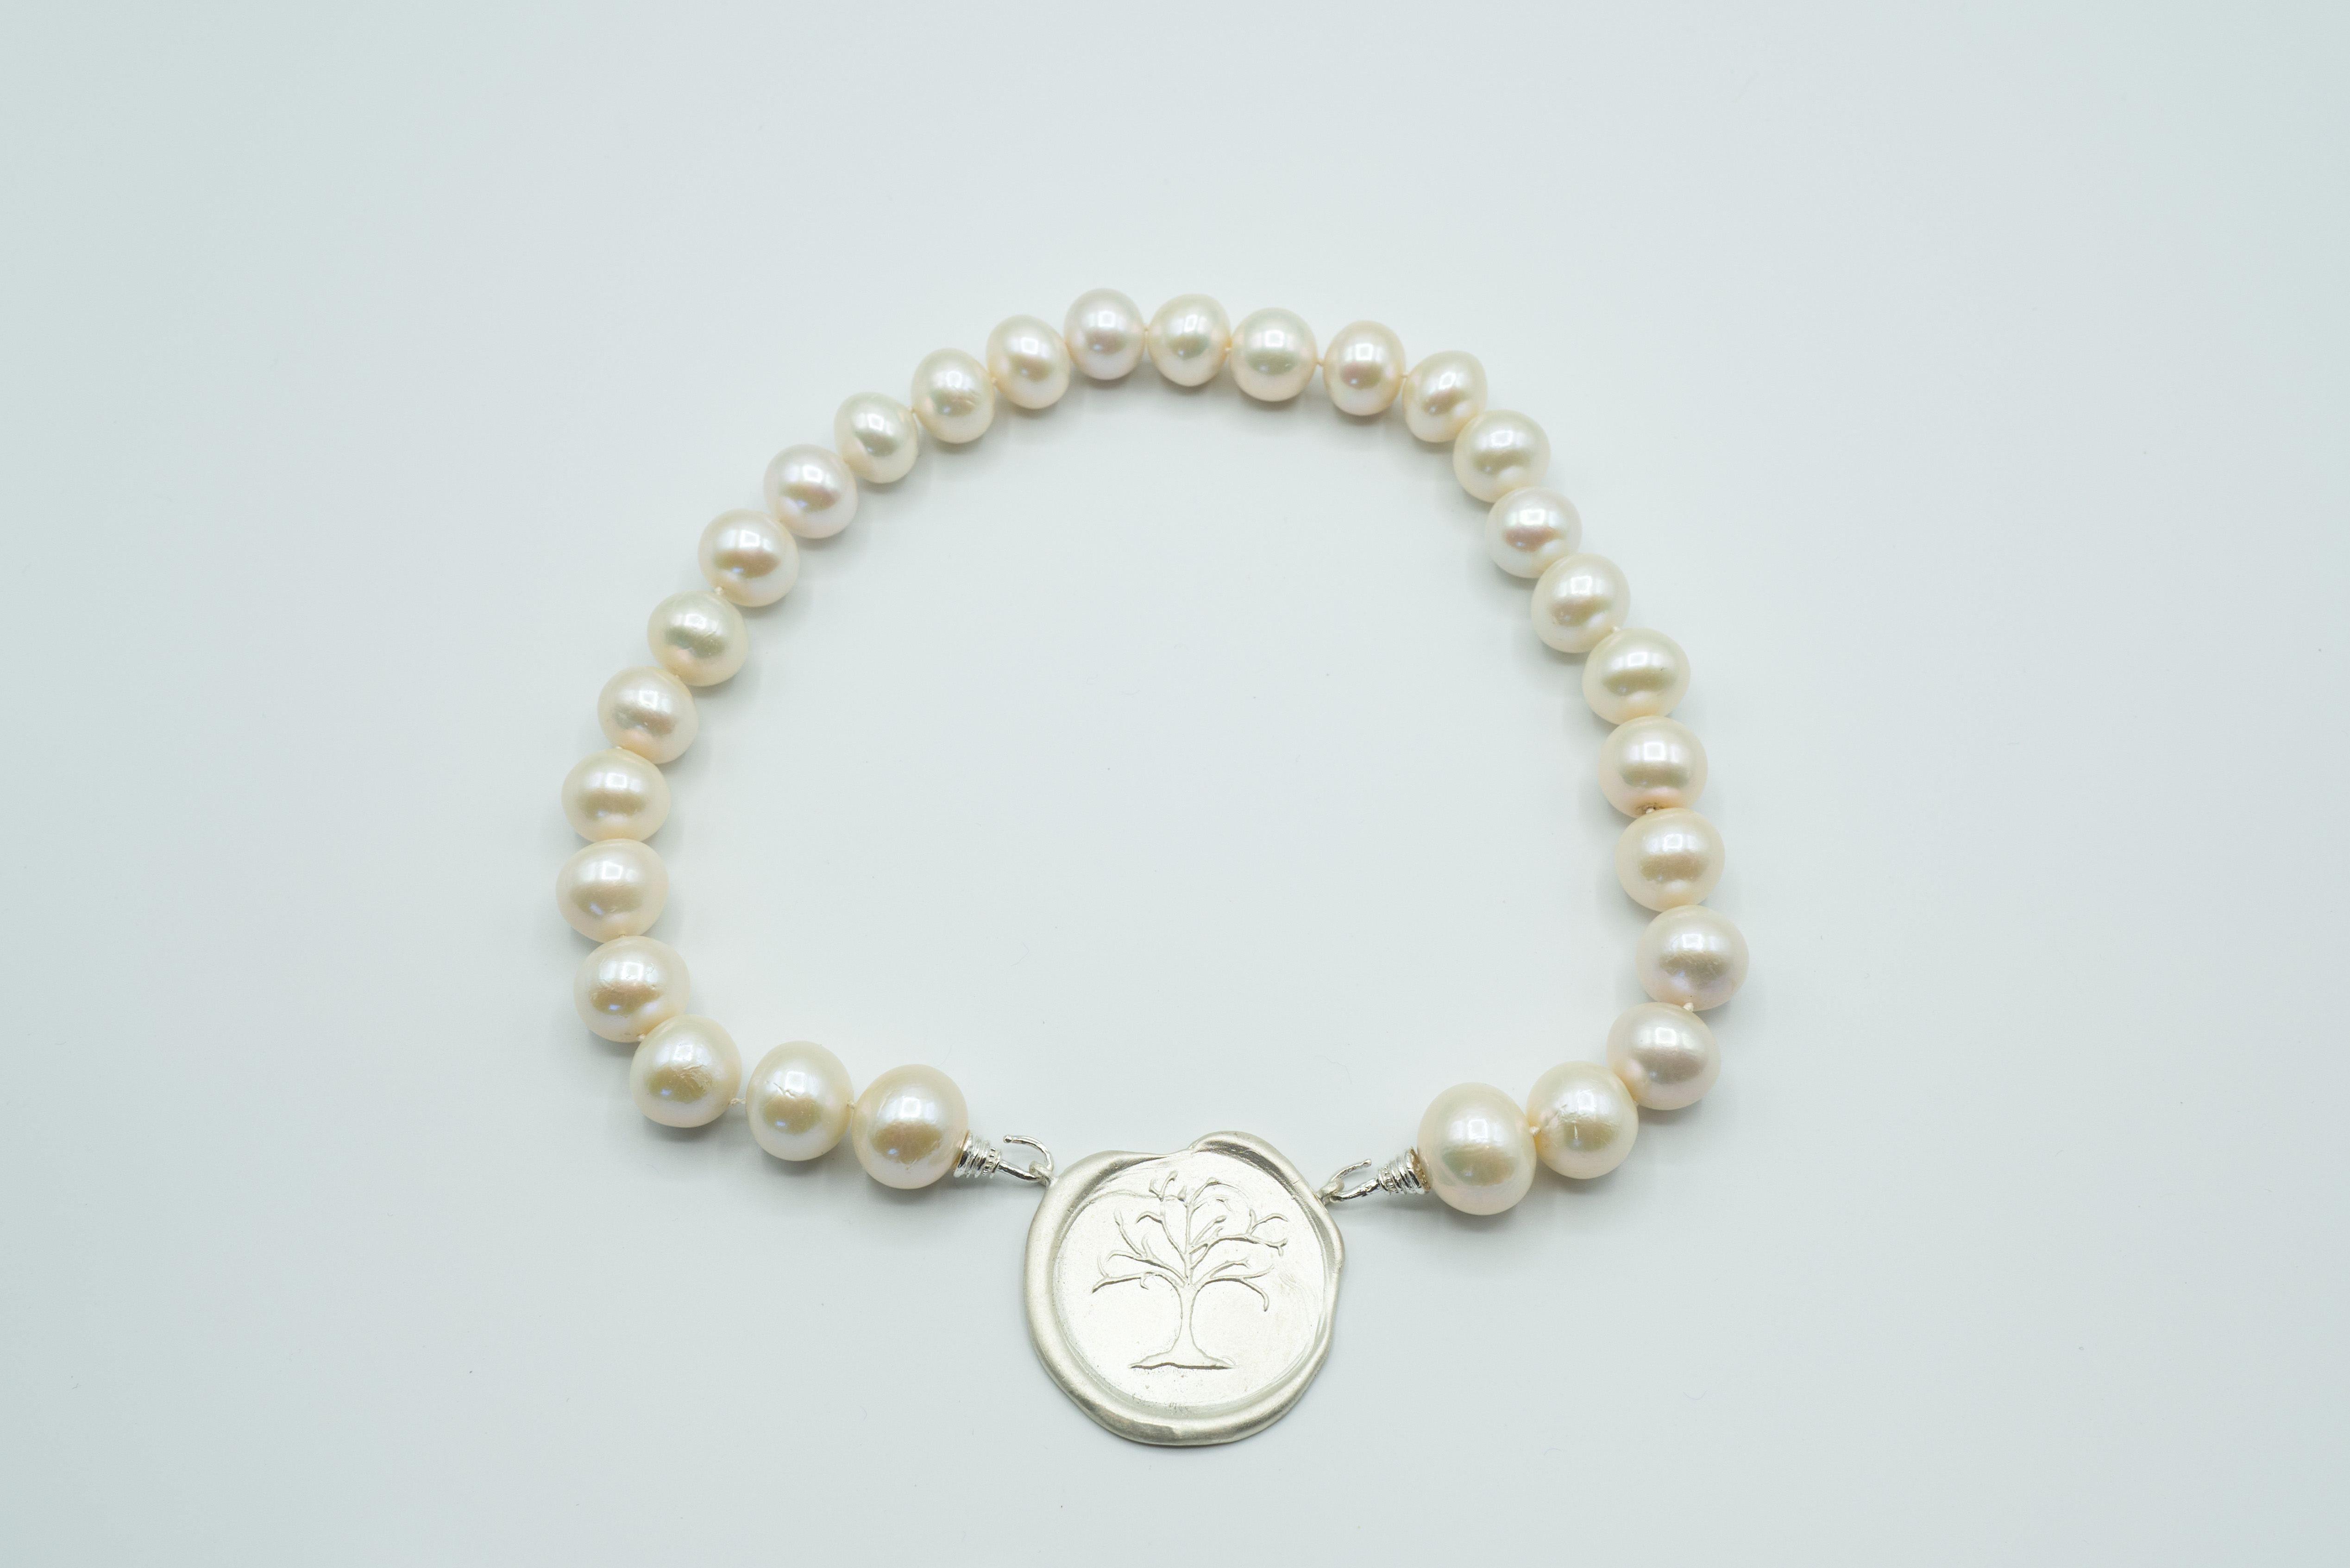 Jumbo Button Near Round Natural Freshwater Pearls High Luster on Sterling Hand Cast Hook, Hand Knotted